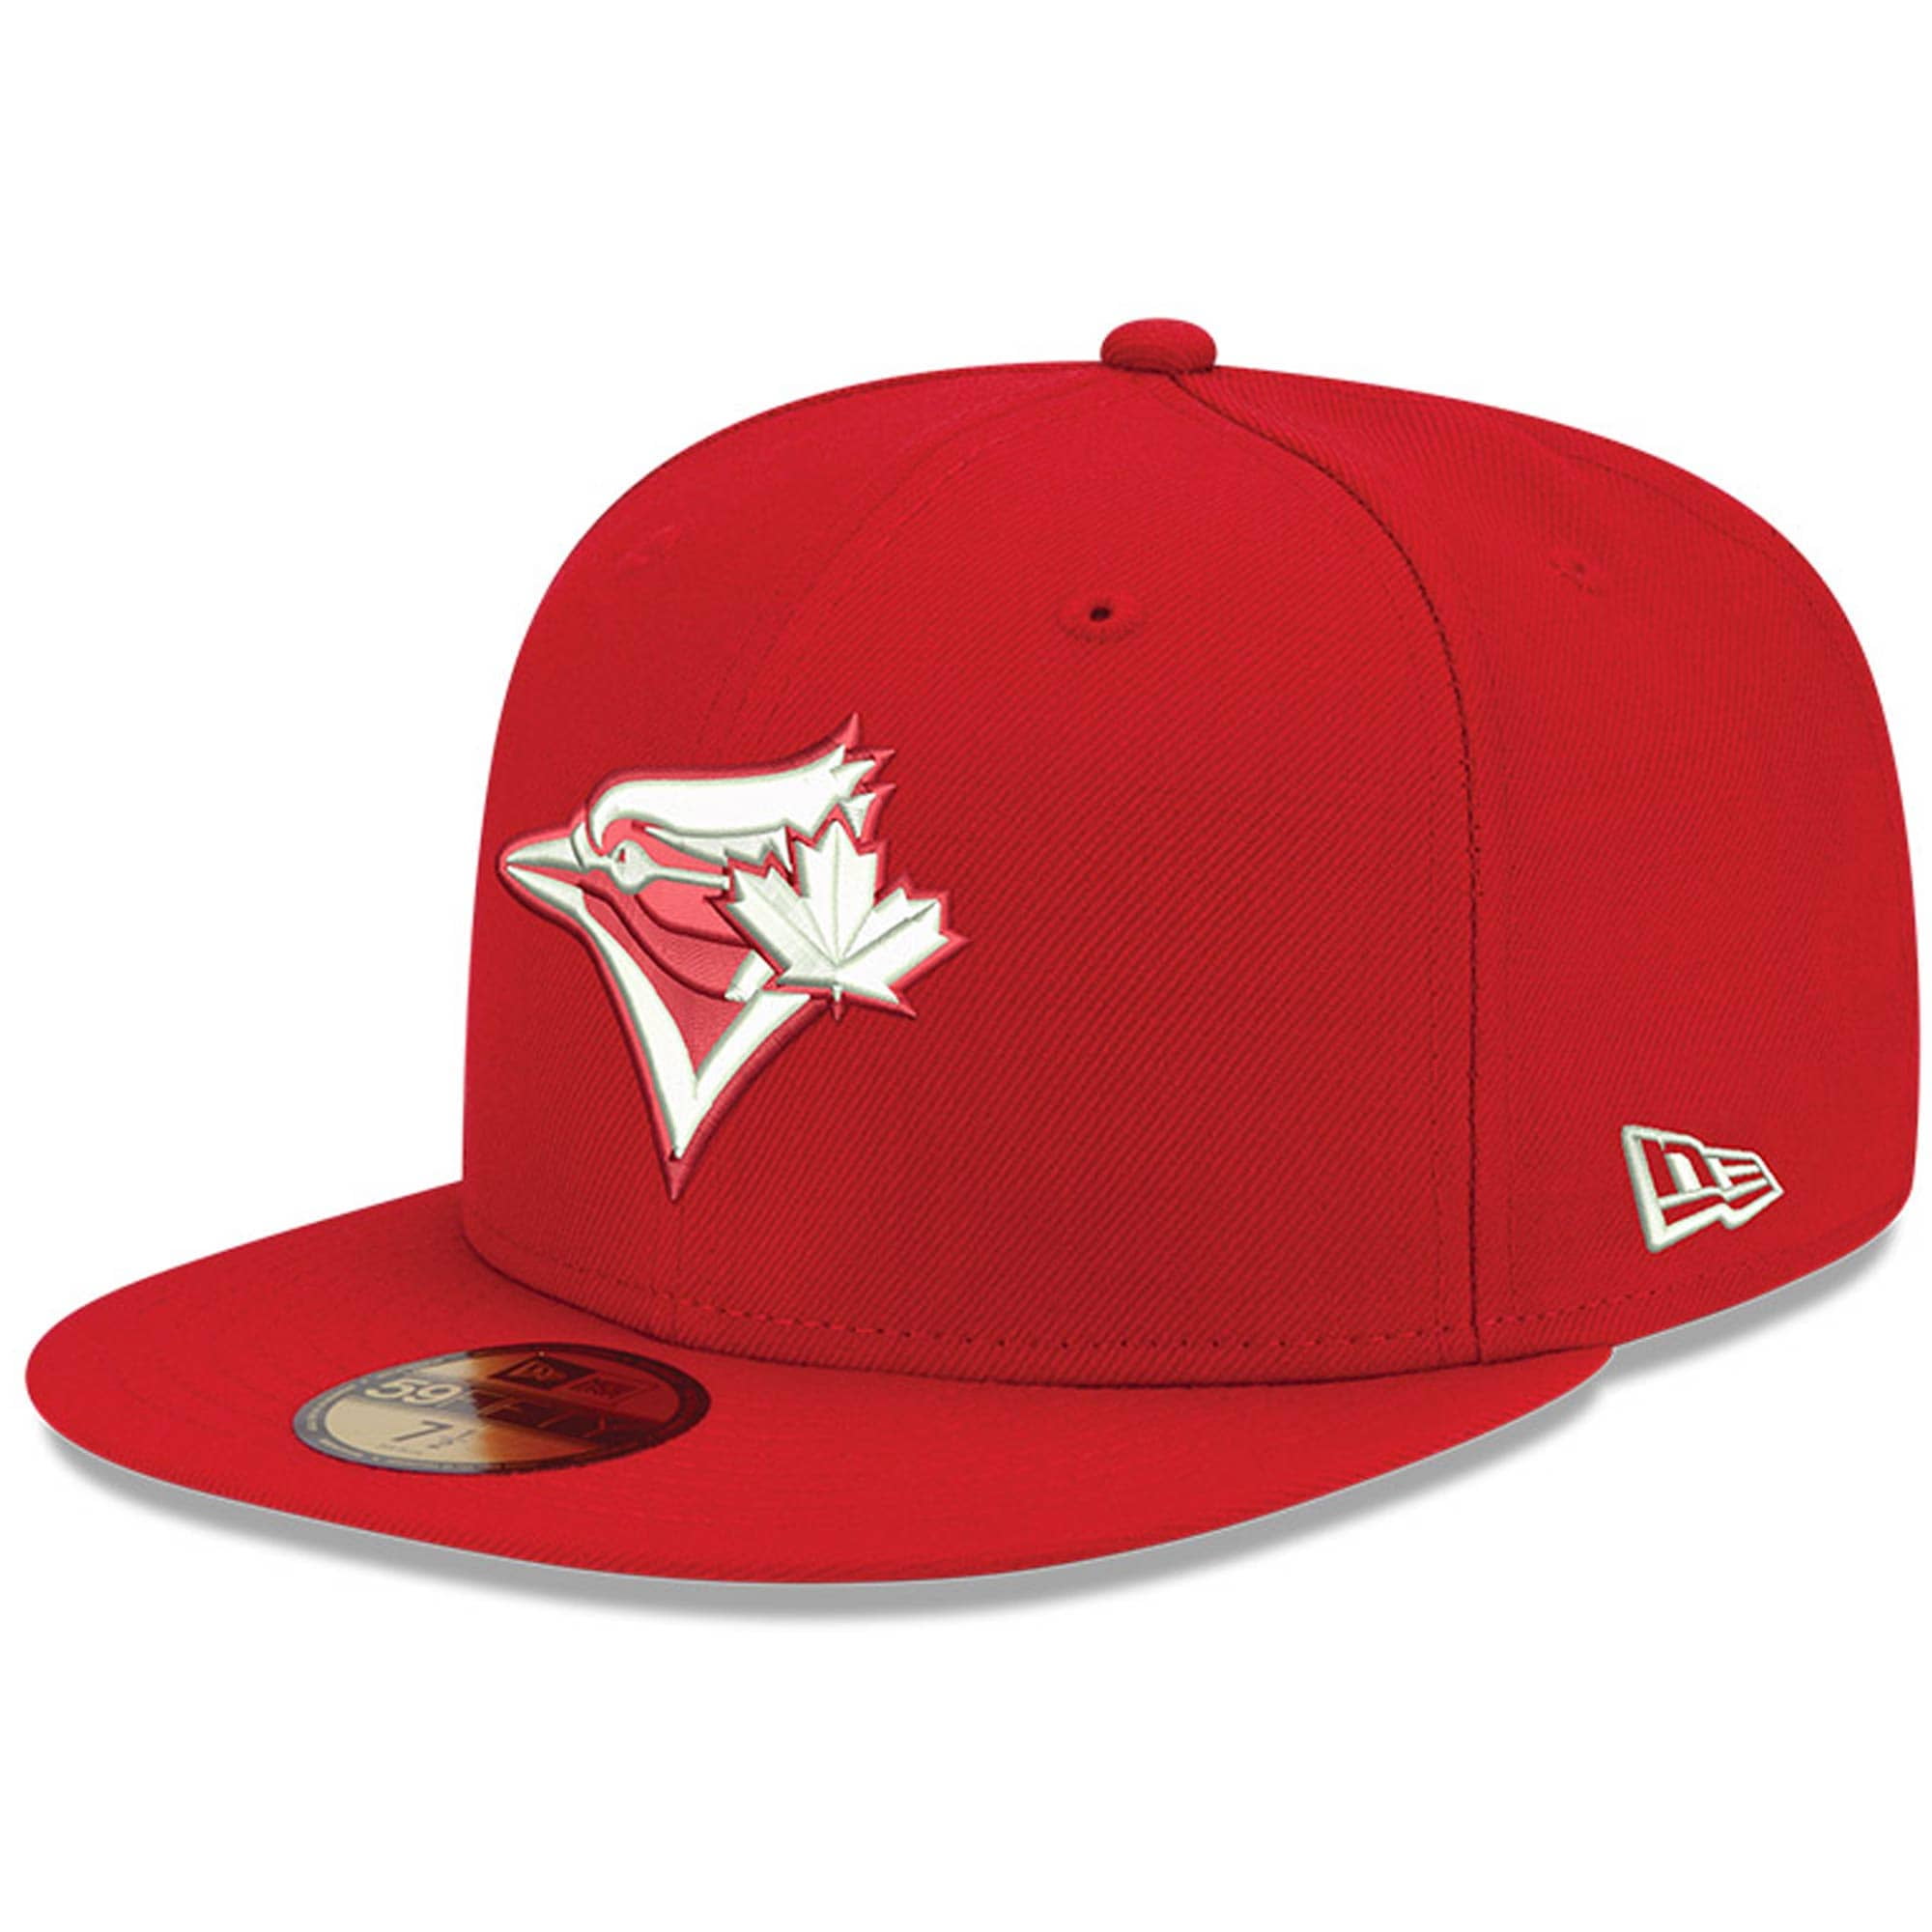 Men's New Era Red Toronto Blue Jays White Logo 59FIFTY Fitted Hat 